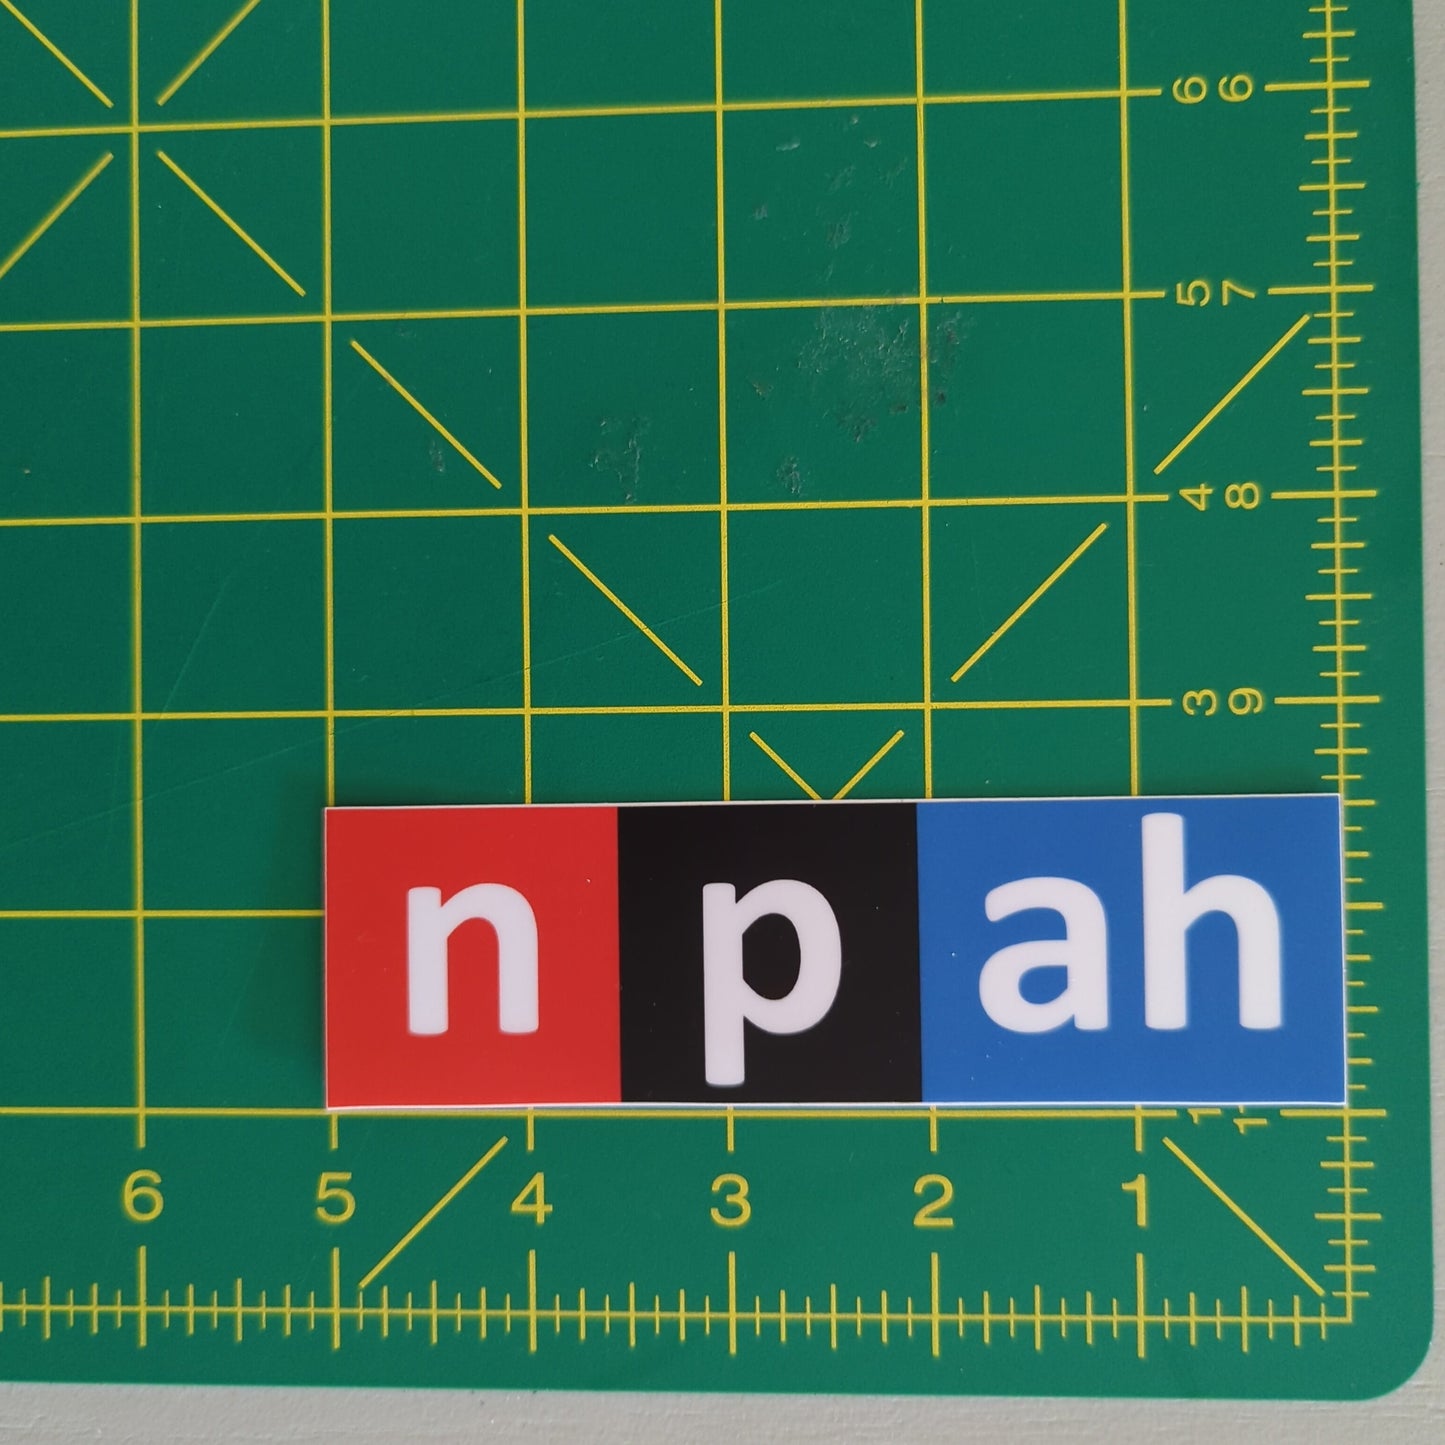 A red, black, and blue sticker in the style of the NPR logo that says "npah"